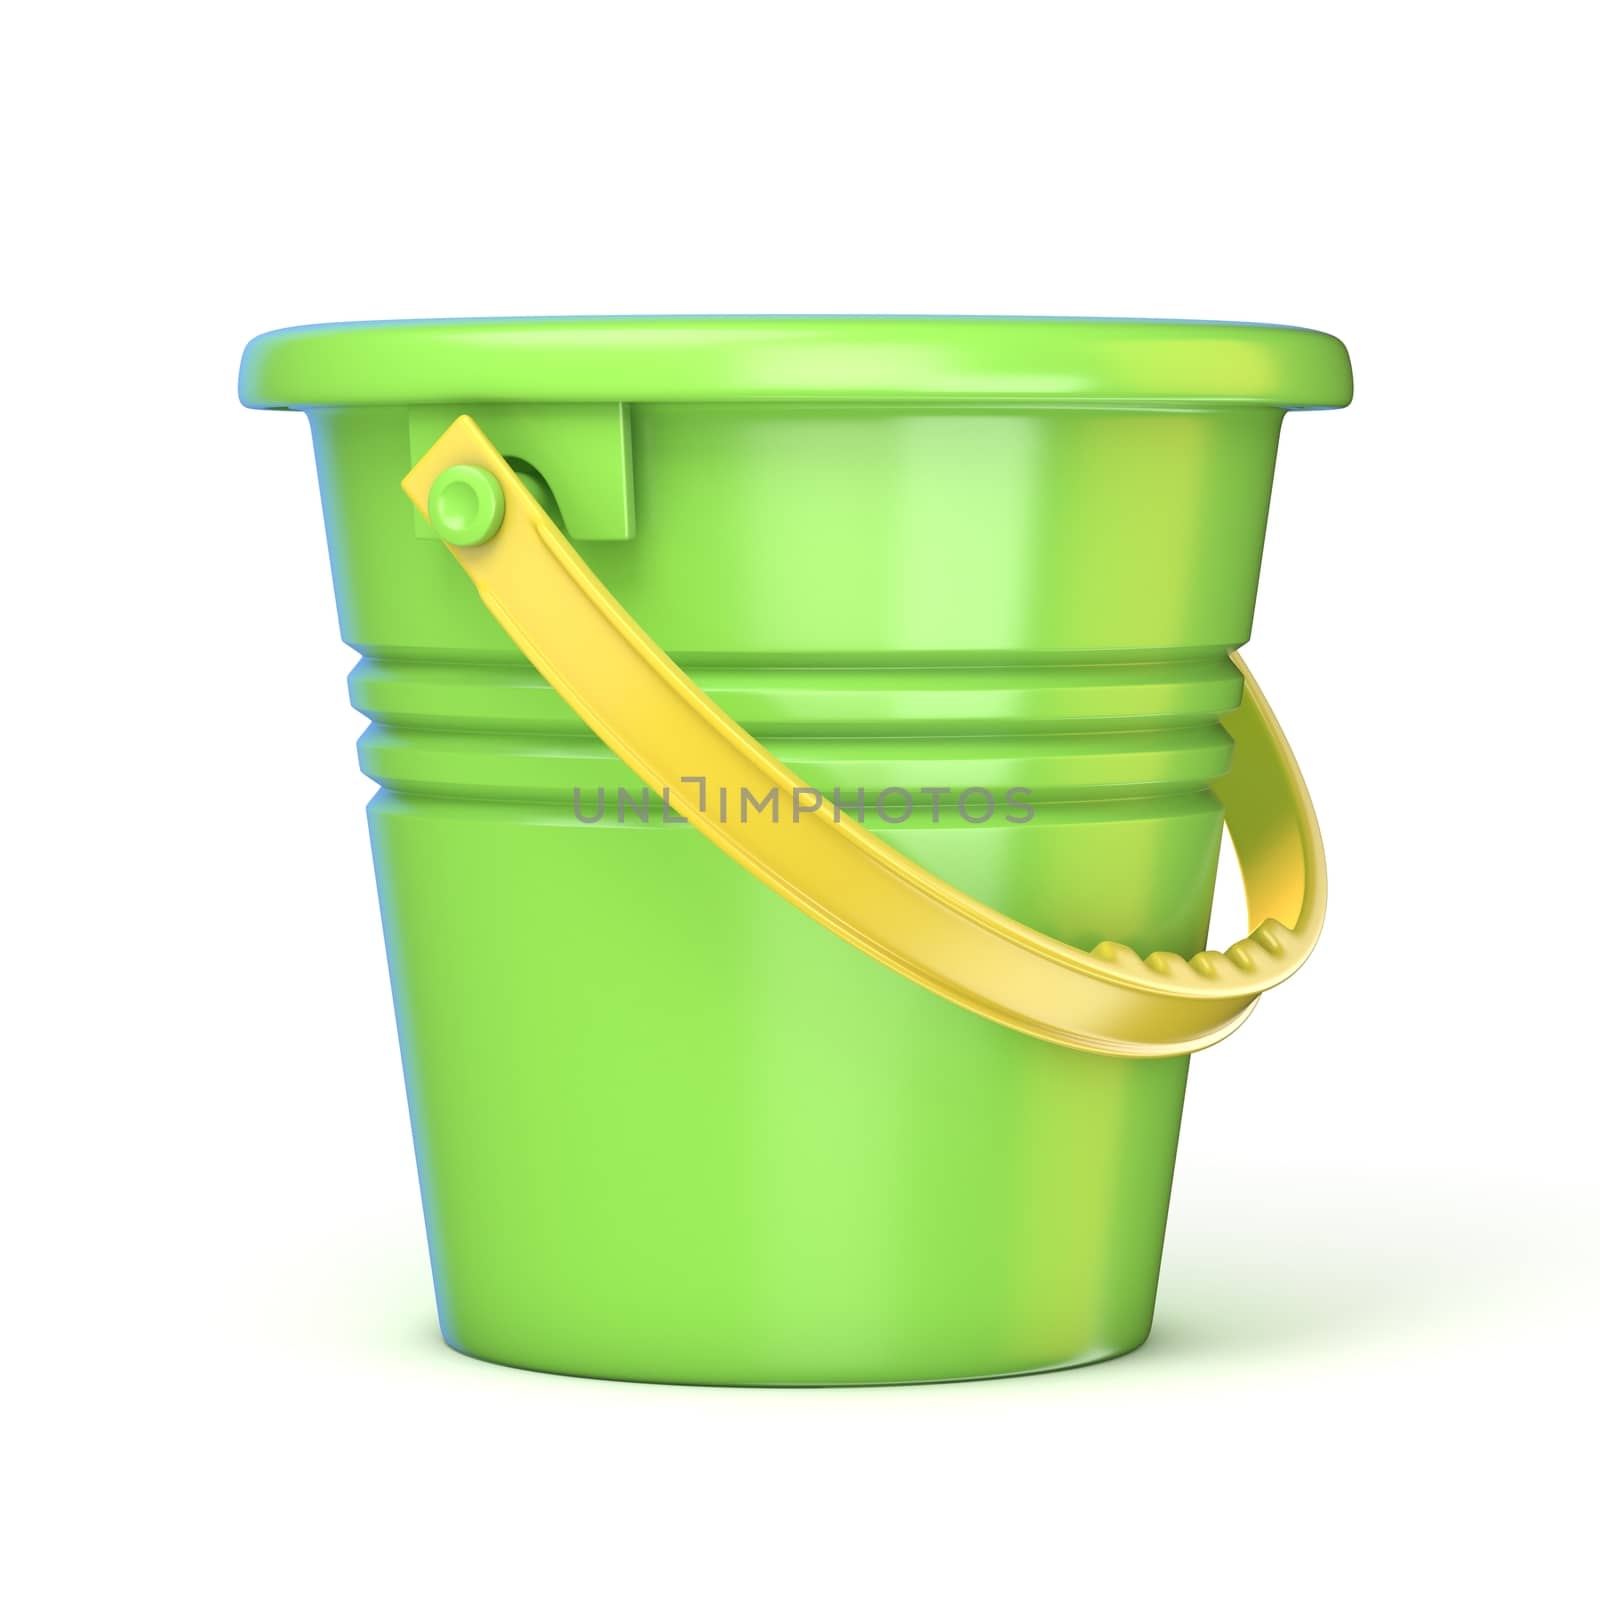 Green yellow sand toy bucket. 3D render illustration isolated on white background